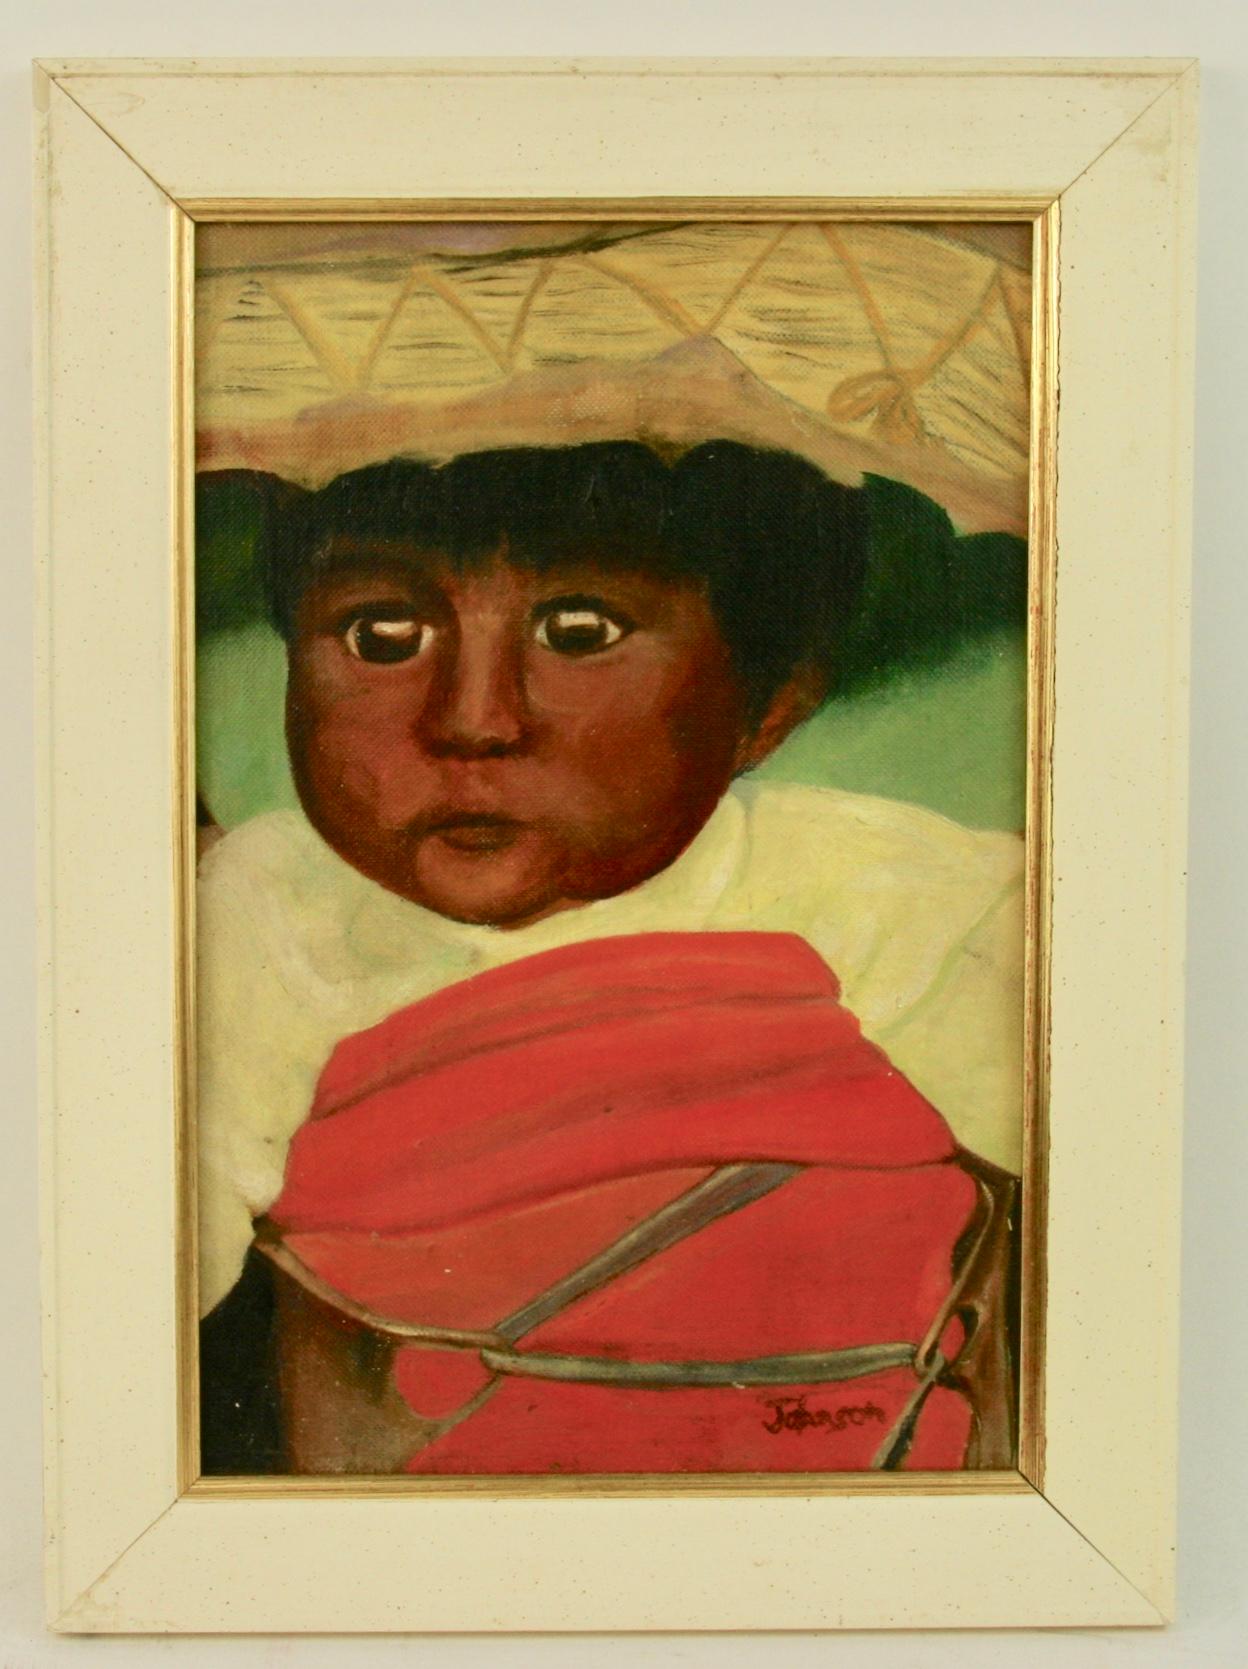 5-3538 Native American Indian child
Oil on board
Set in a vintage wood frame
Image size 11x7